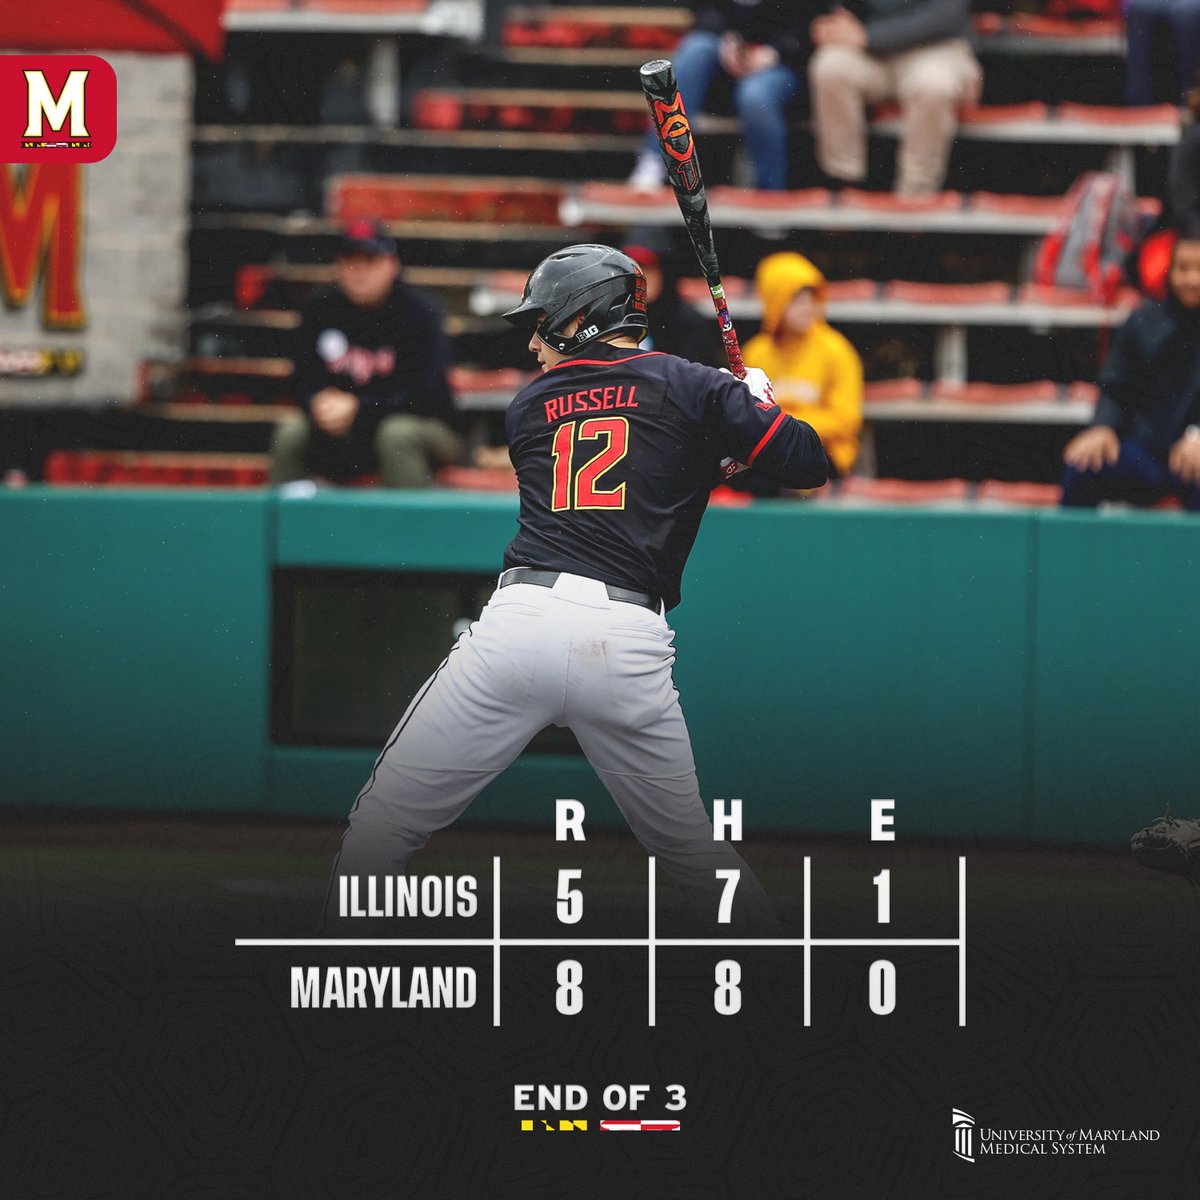 Terps lead after three innings

#DirtyTerps